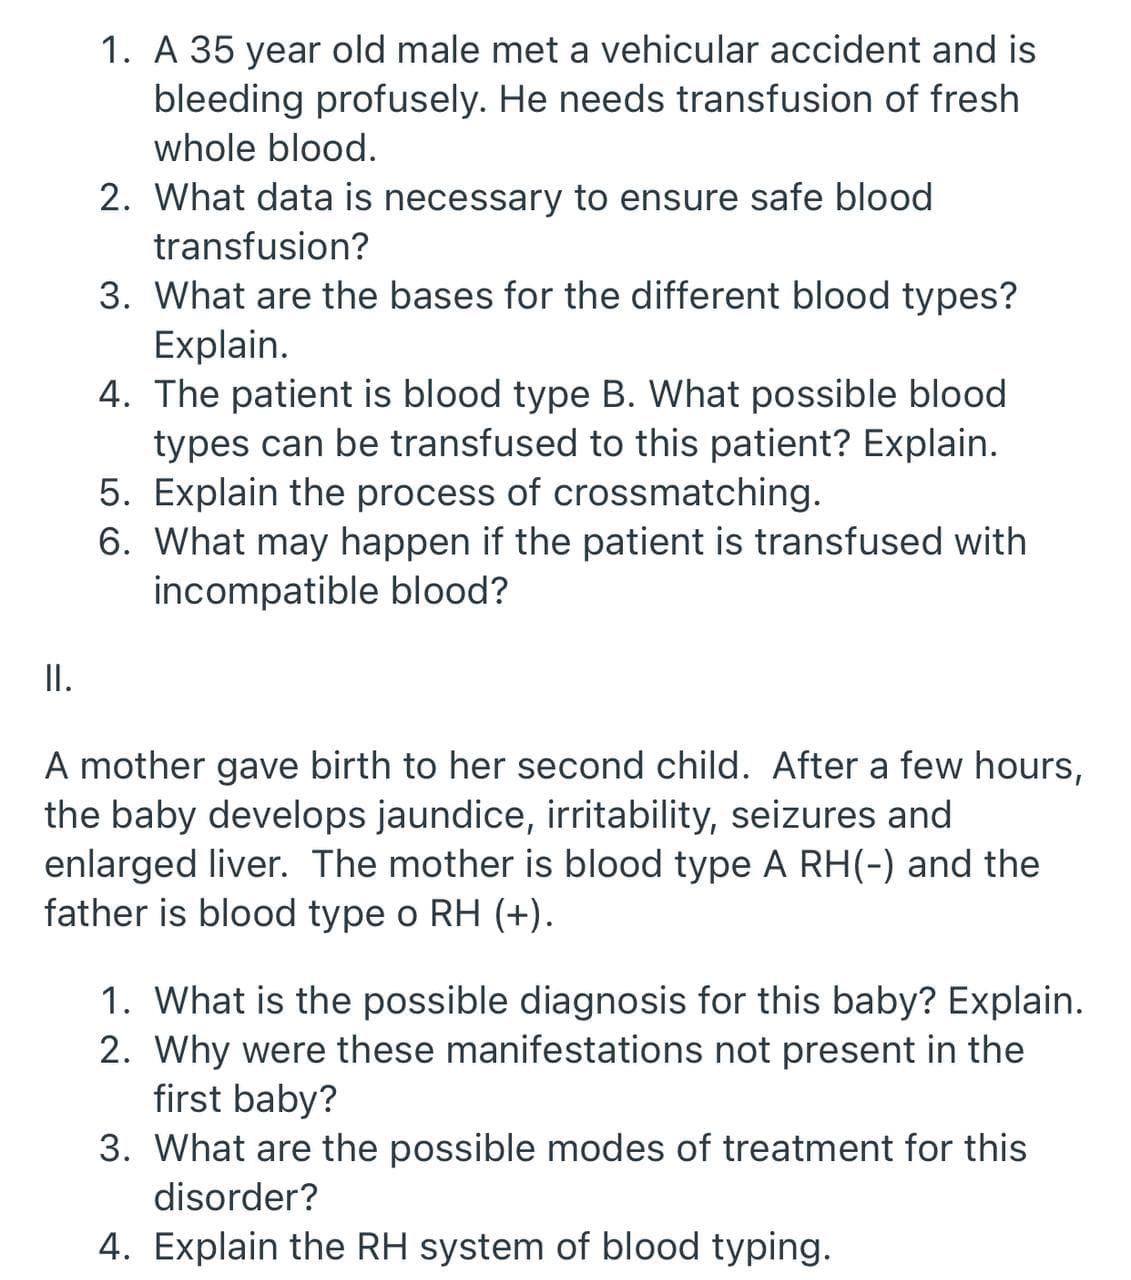 1. A 35 year old male met a vehicular accident and is
bleeding profusely. He needs transfusion of fresh
whole blood.
2. What data is necessary to ensure safe blood
transfusion?
3. What are the bases for the different blood types?
Explain.
4. The patient is blood type B. What possible blood
types can be transfused to this patient? Explain.
5. Explain the process of crossmatching.
6. What may happen if the patient is transfused with
incompatible blood?
I.
A mother gave birth to her second child. After a few hours,
the baby develops jaundice, irritability, seizures and
enlarged liver. The mother is blood type A RH(-) and the
father is blood type o RH (+).
1. What is the possible diagnosis for this baby? Explain.
2. Why were these manifestations not present in the
first baby?
3. What are the possible modes of treatment for this
disorder?
4. Explain the RH system of blood typing.
